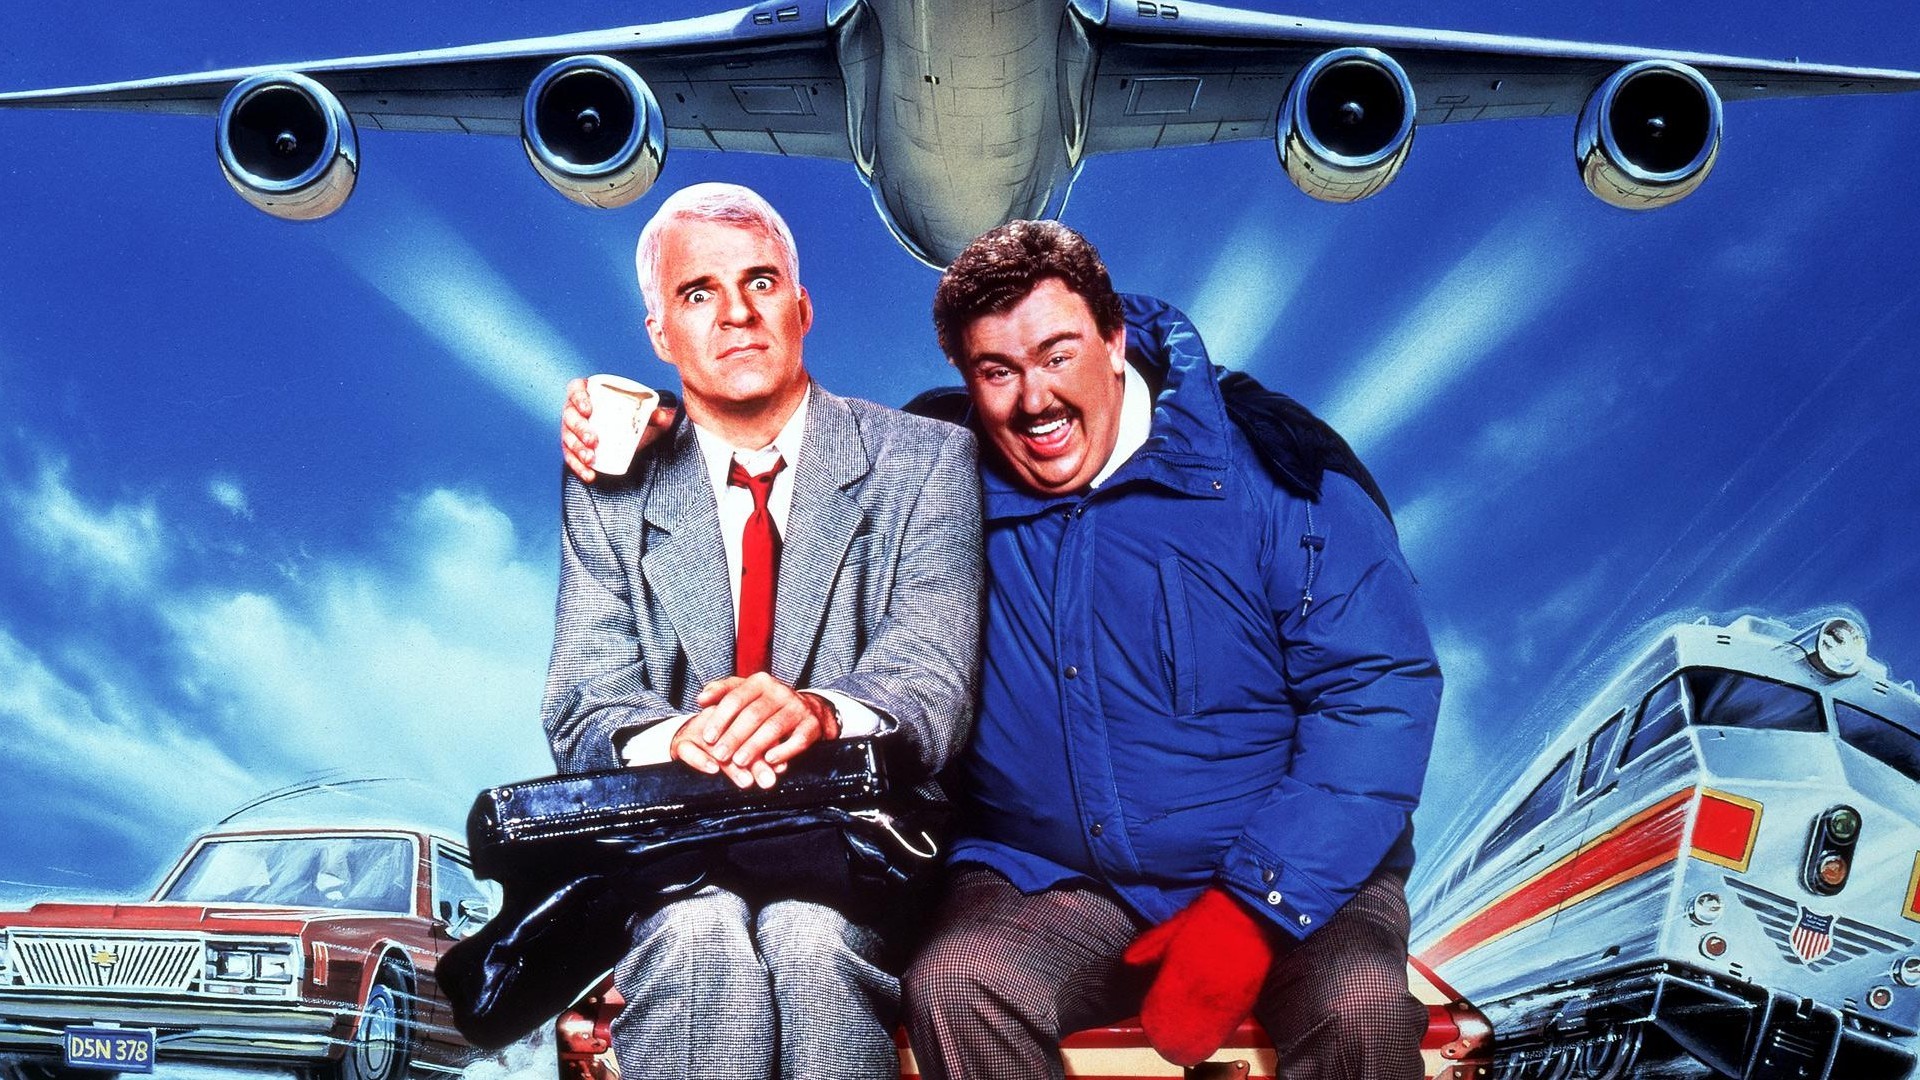 HD Quality Wallpaper | Collection: Movie, 1920x1080 Planes, Trains & Automobiles